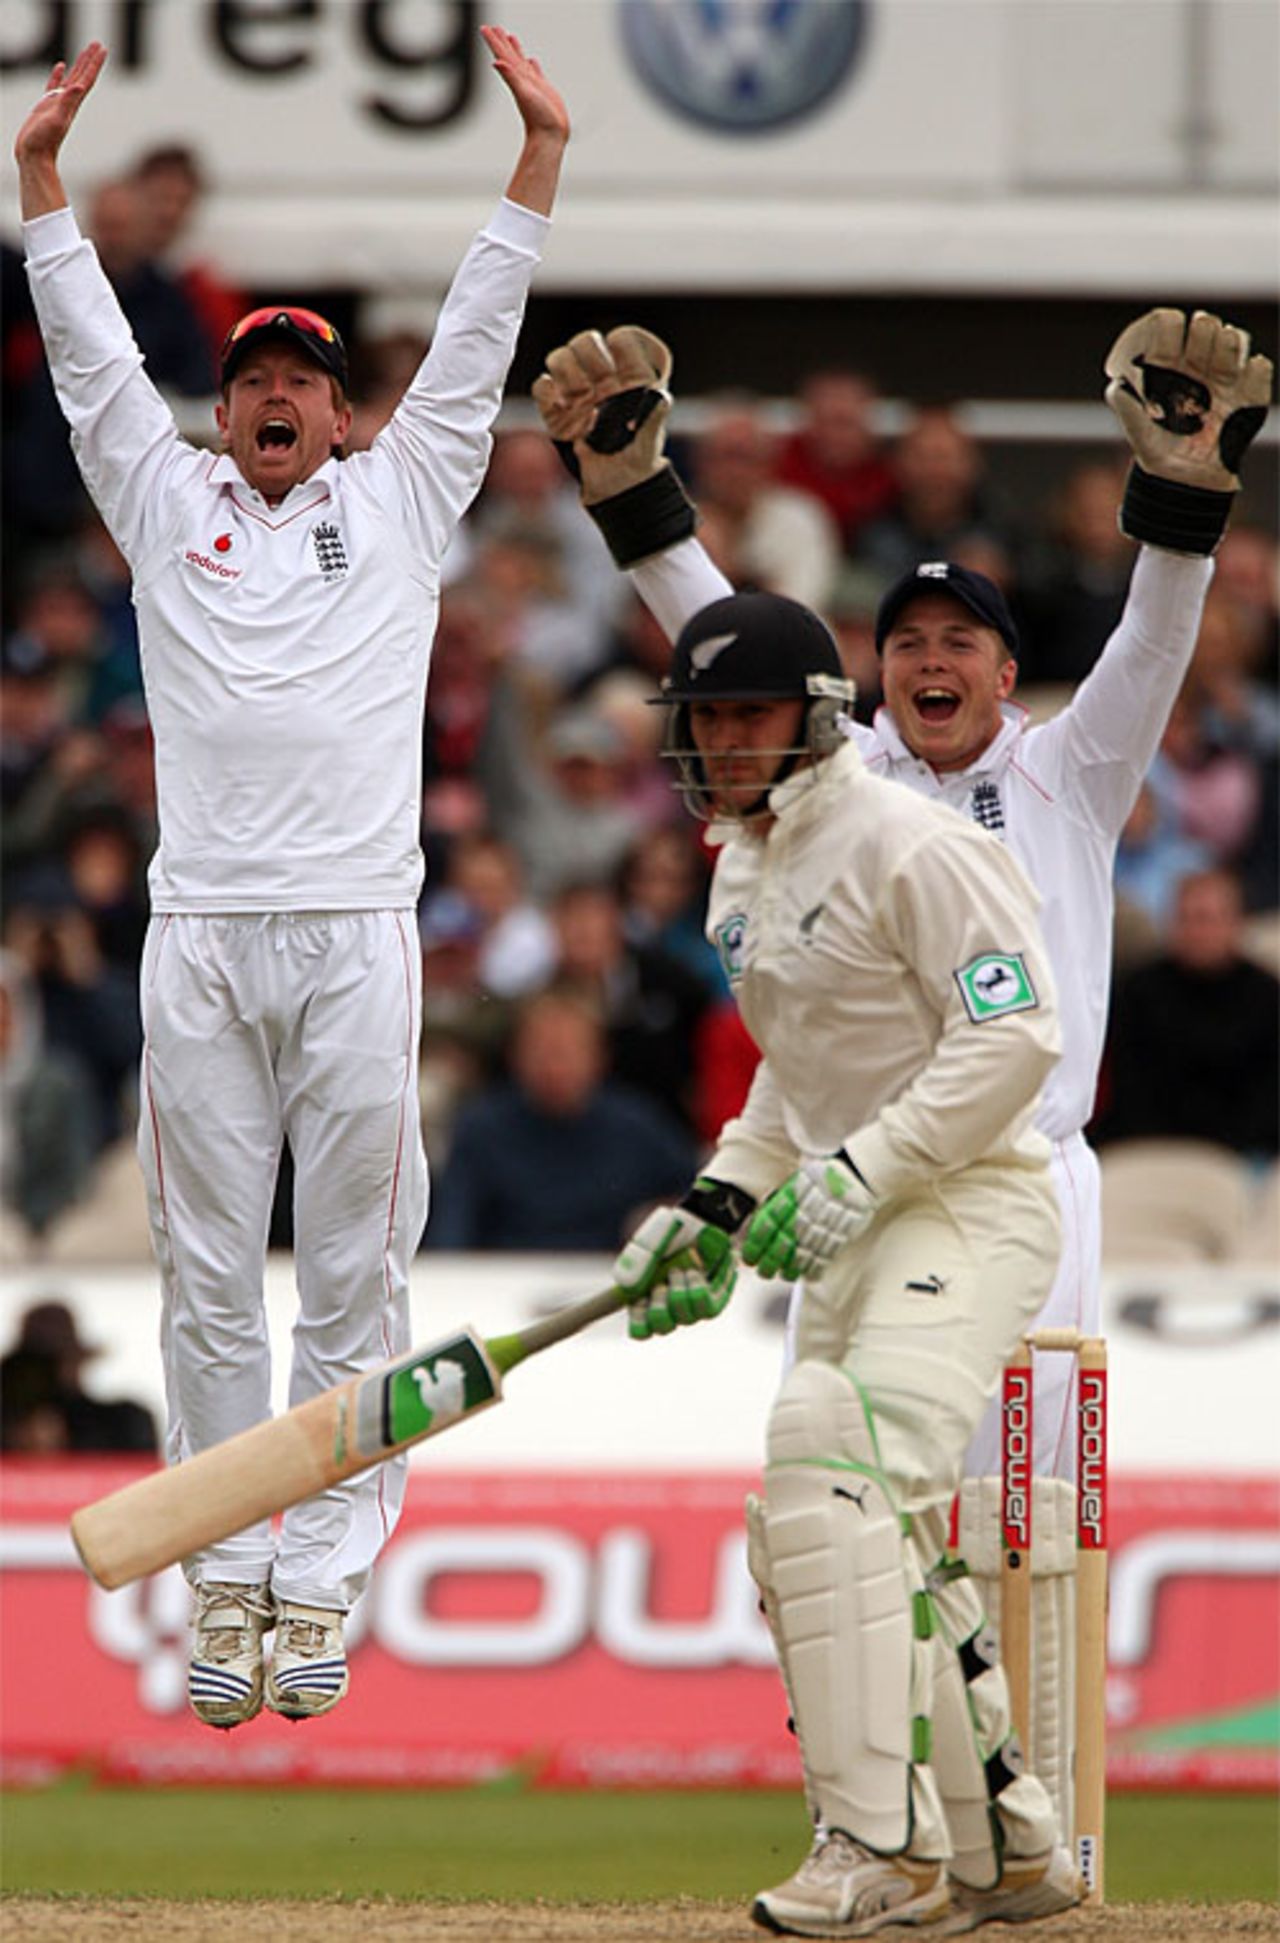 The eyes have it - Paul Collingwood and Tim Ambrose know that Monty Panesar has trapped Brendon McCullum, England v New Zealand, 2nd Test, Old Trafford, May 25, 2008